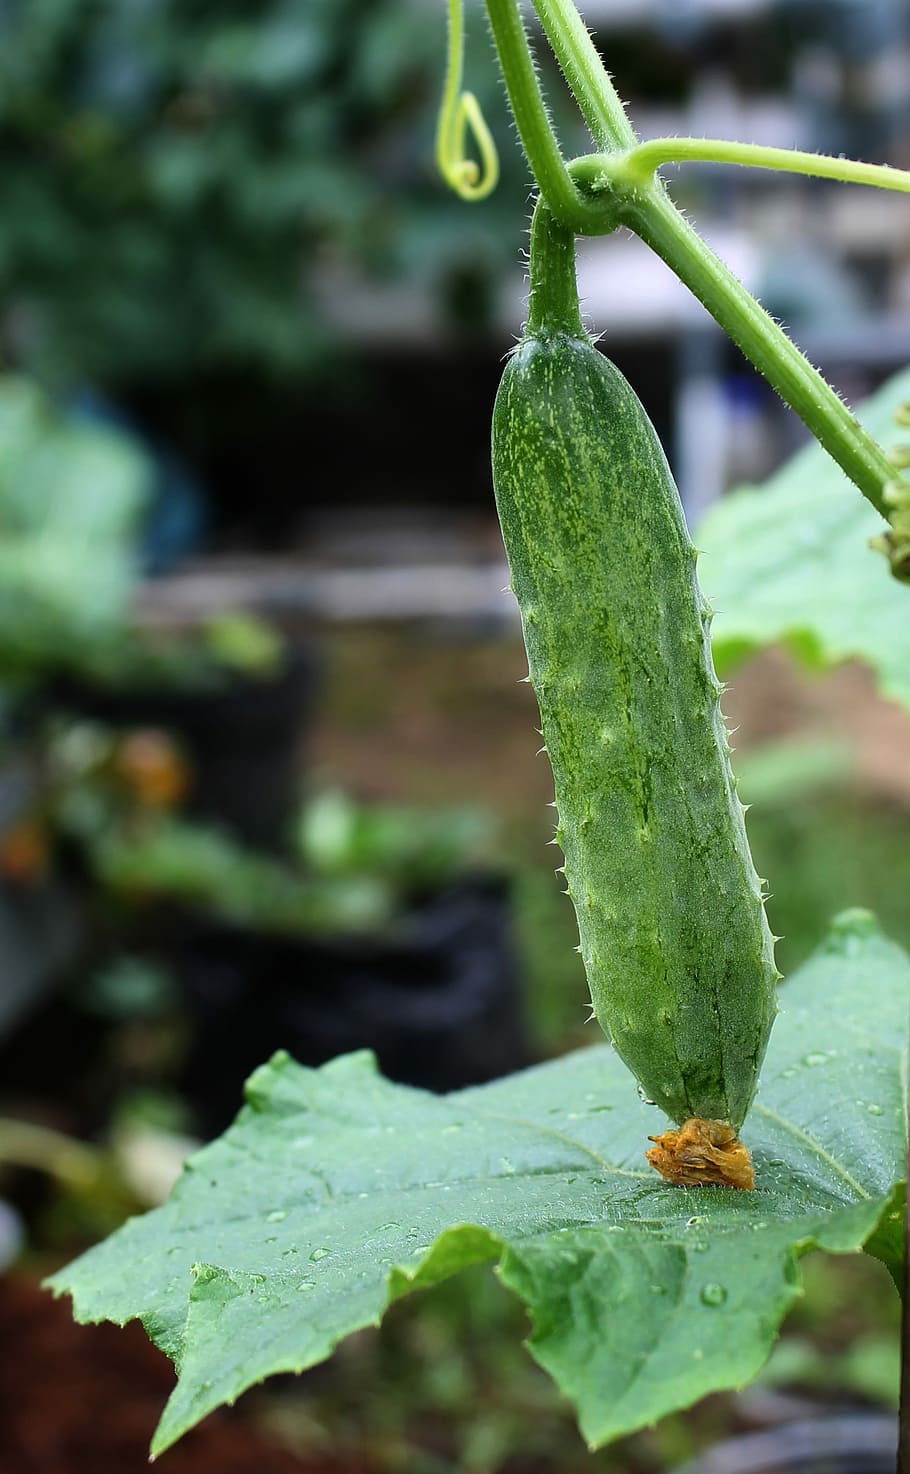 Cucumber, Salad, Grow, Vegetable, grow vegetable, green color, leaf, growth, plant, nature